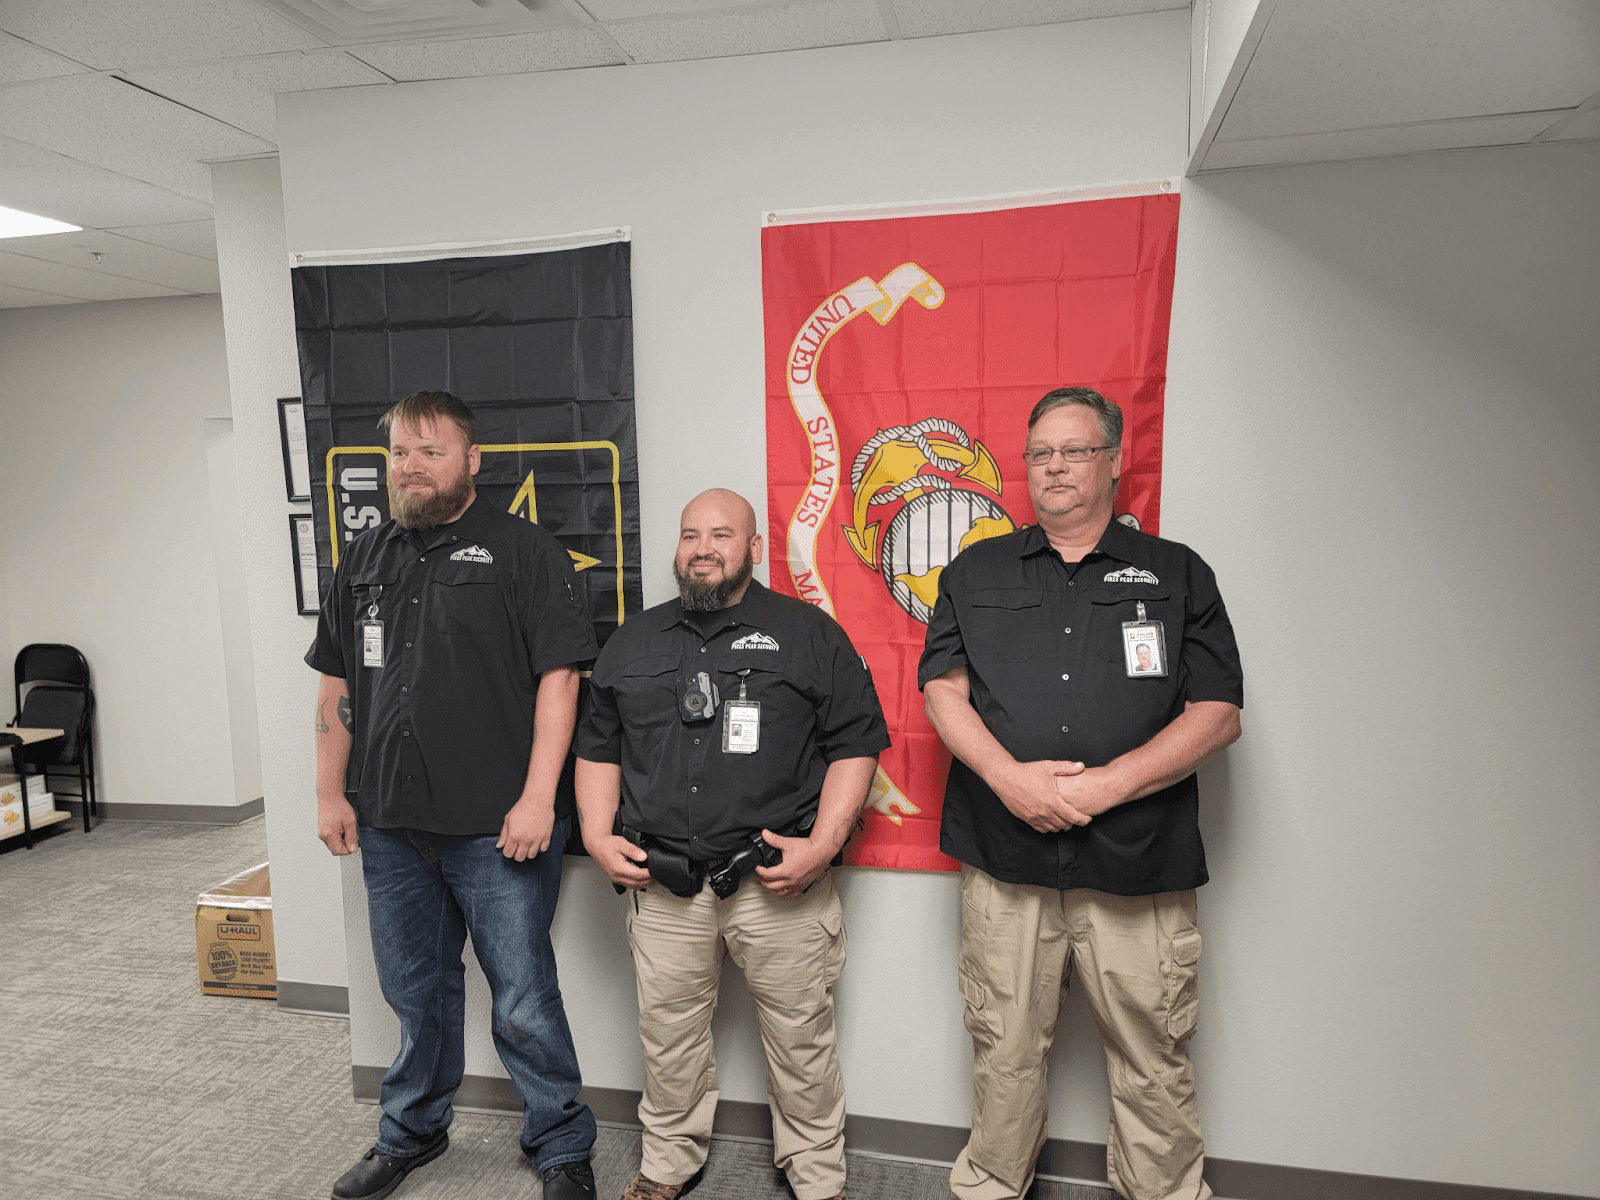 3 security officers standing next to each other in front of a Marine Corps and Military flag